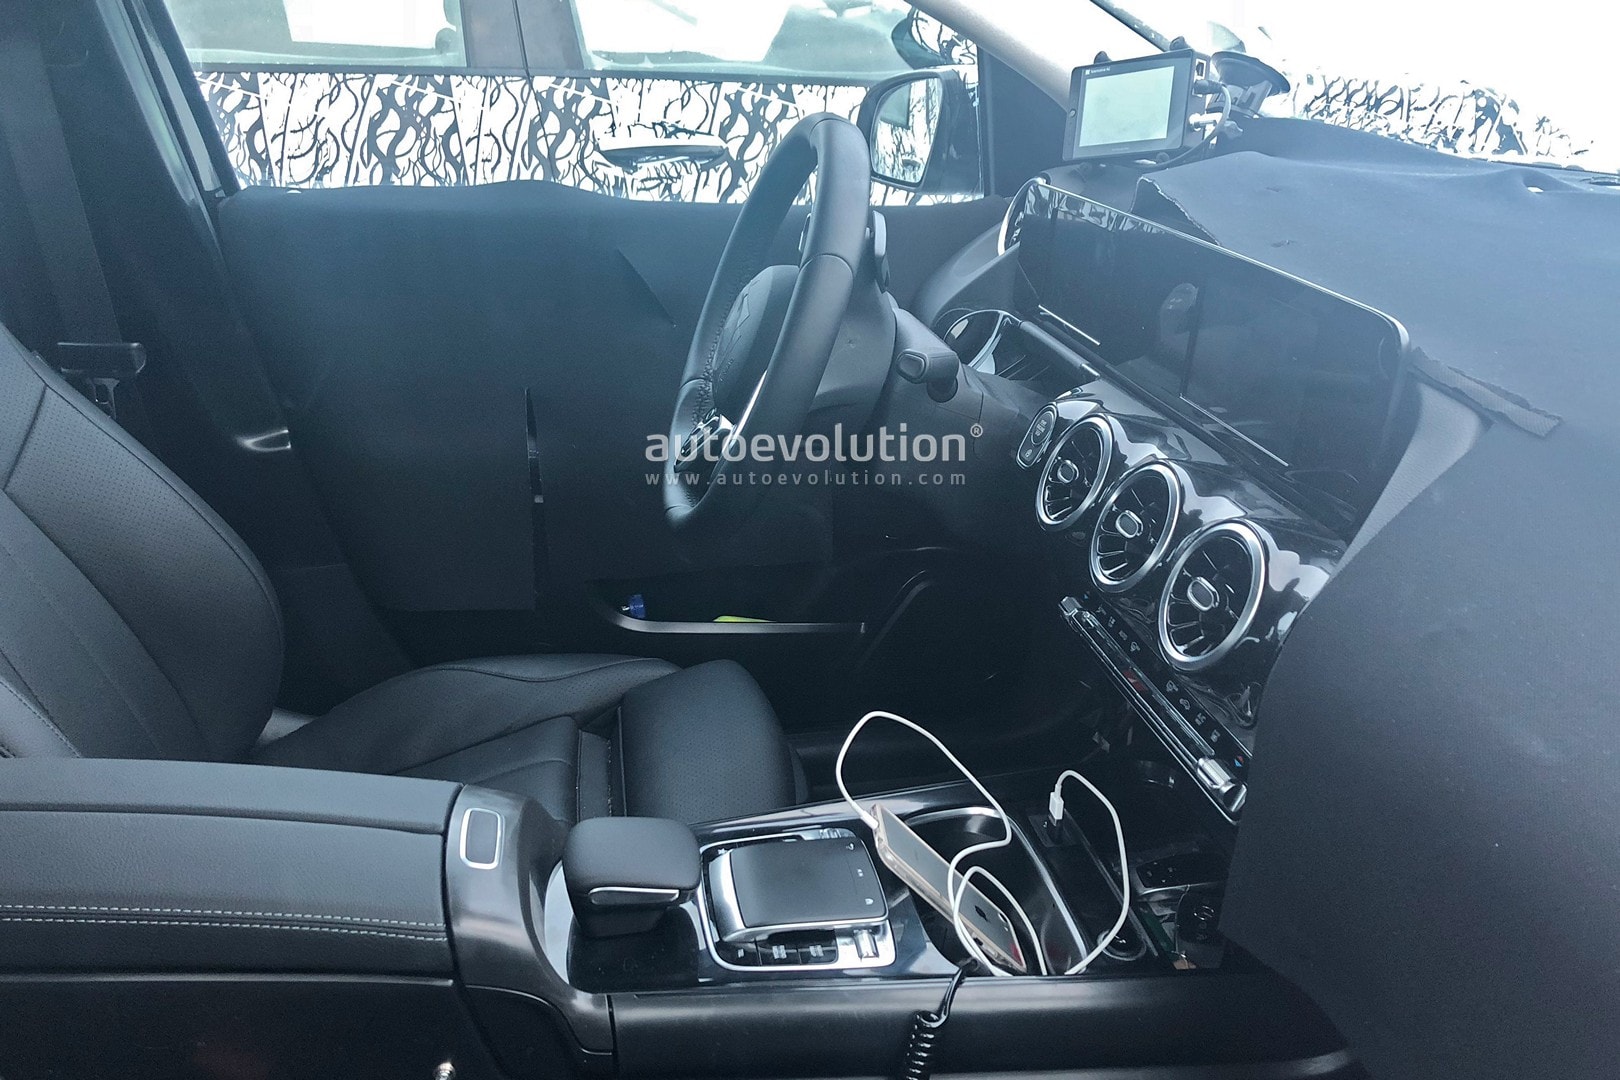 19 Mercedes Benz B Class Reveals New Interior With Mbux Screens Amg Line Kit Autoevolution